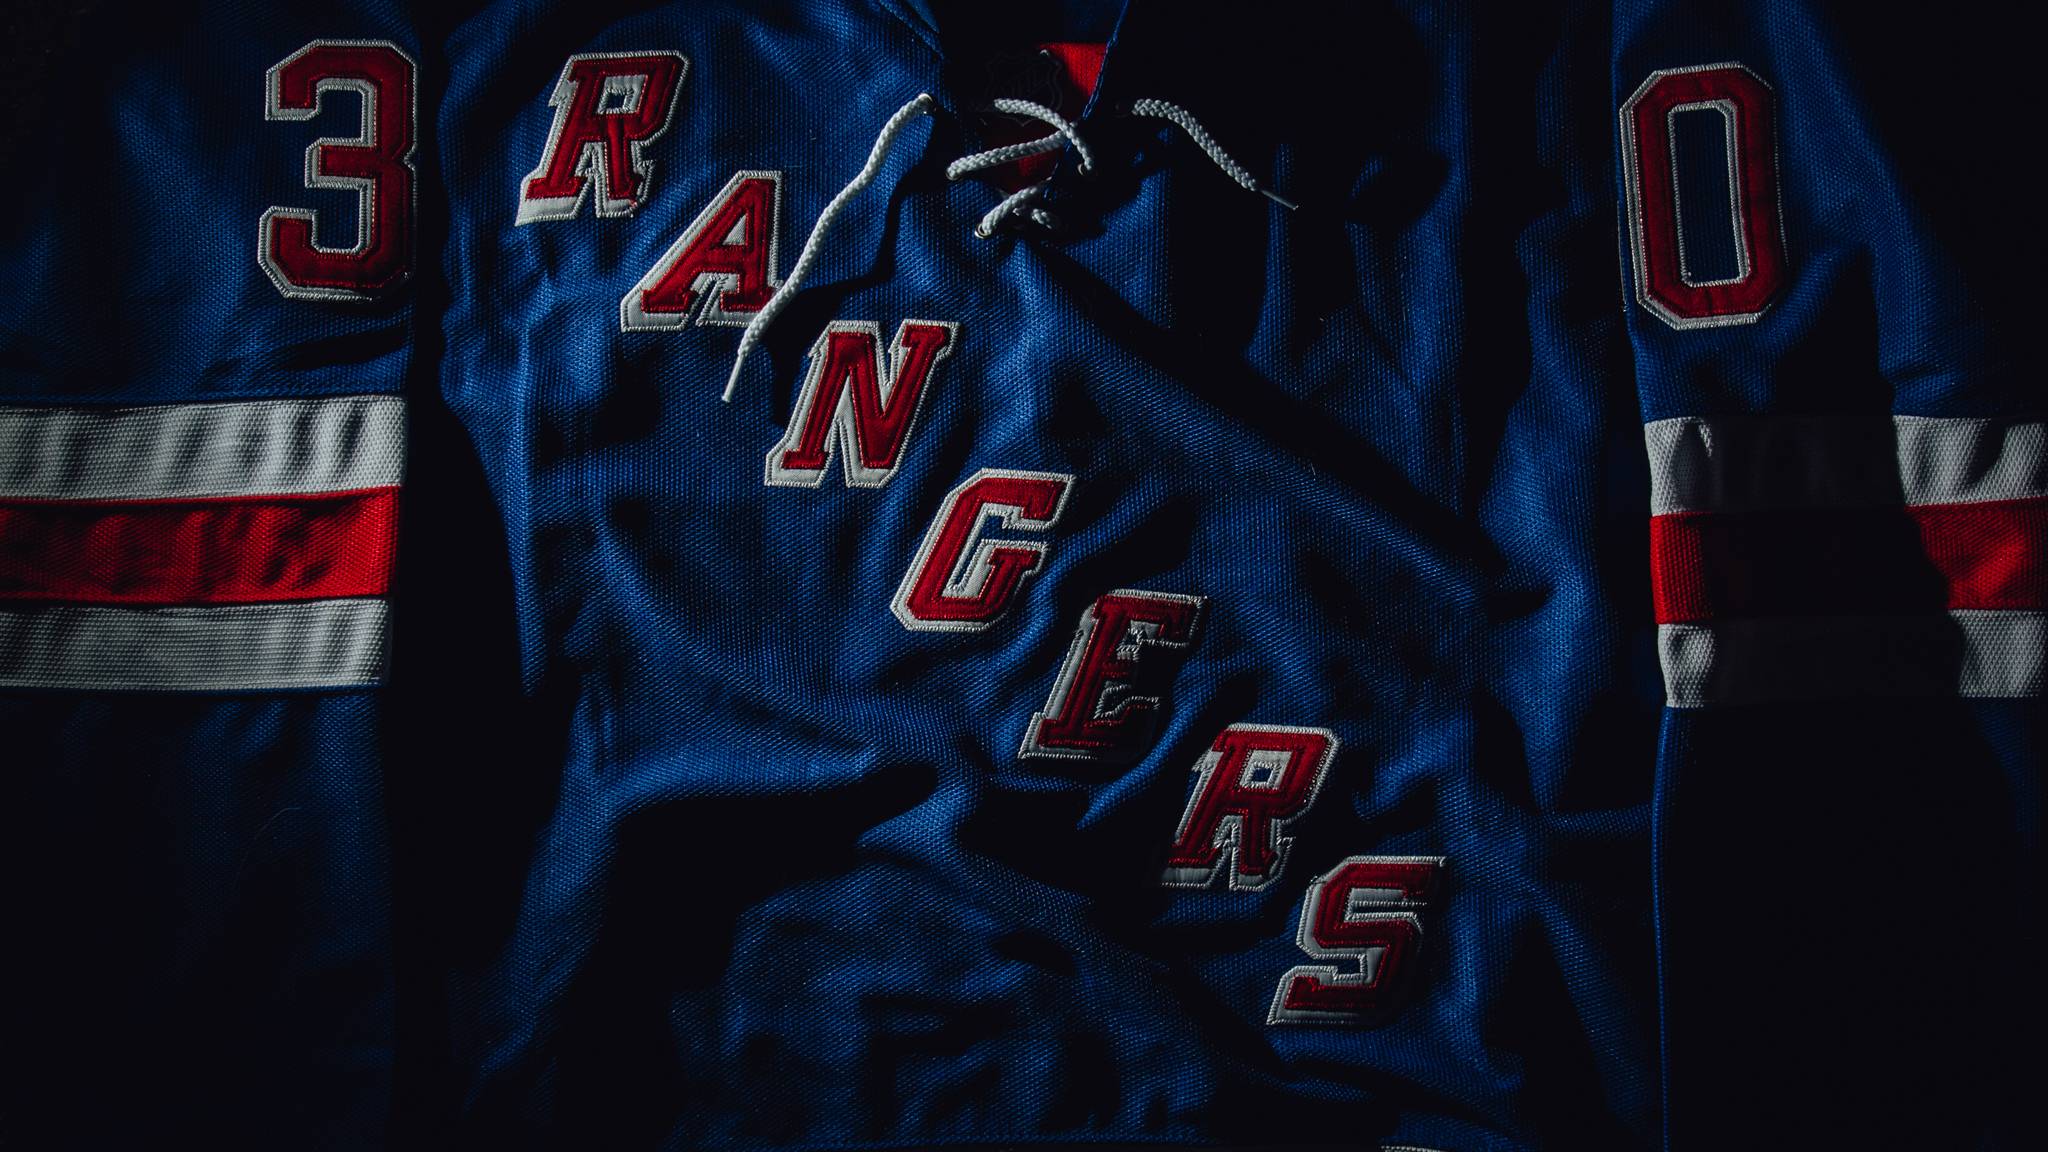 I Thought My New Jersey Could Make For A Nice Wallpaper Rangers